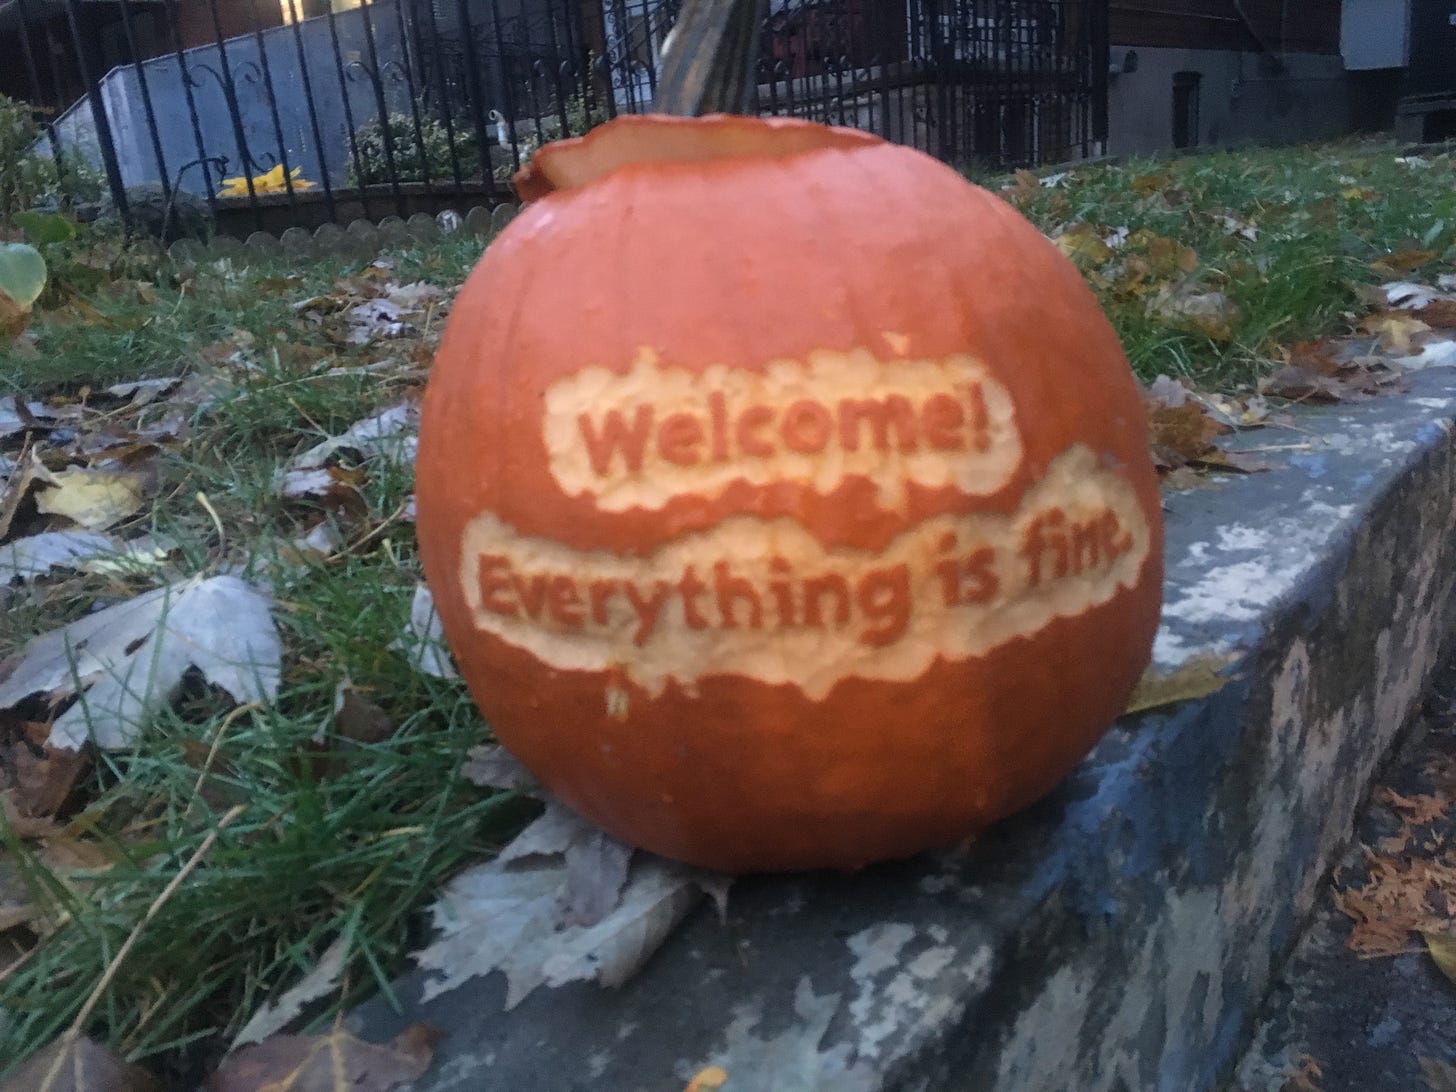 A Hallowe'en pumpkin carved with the words "Welcome! Everything is fine." It's not, though.